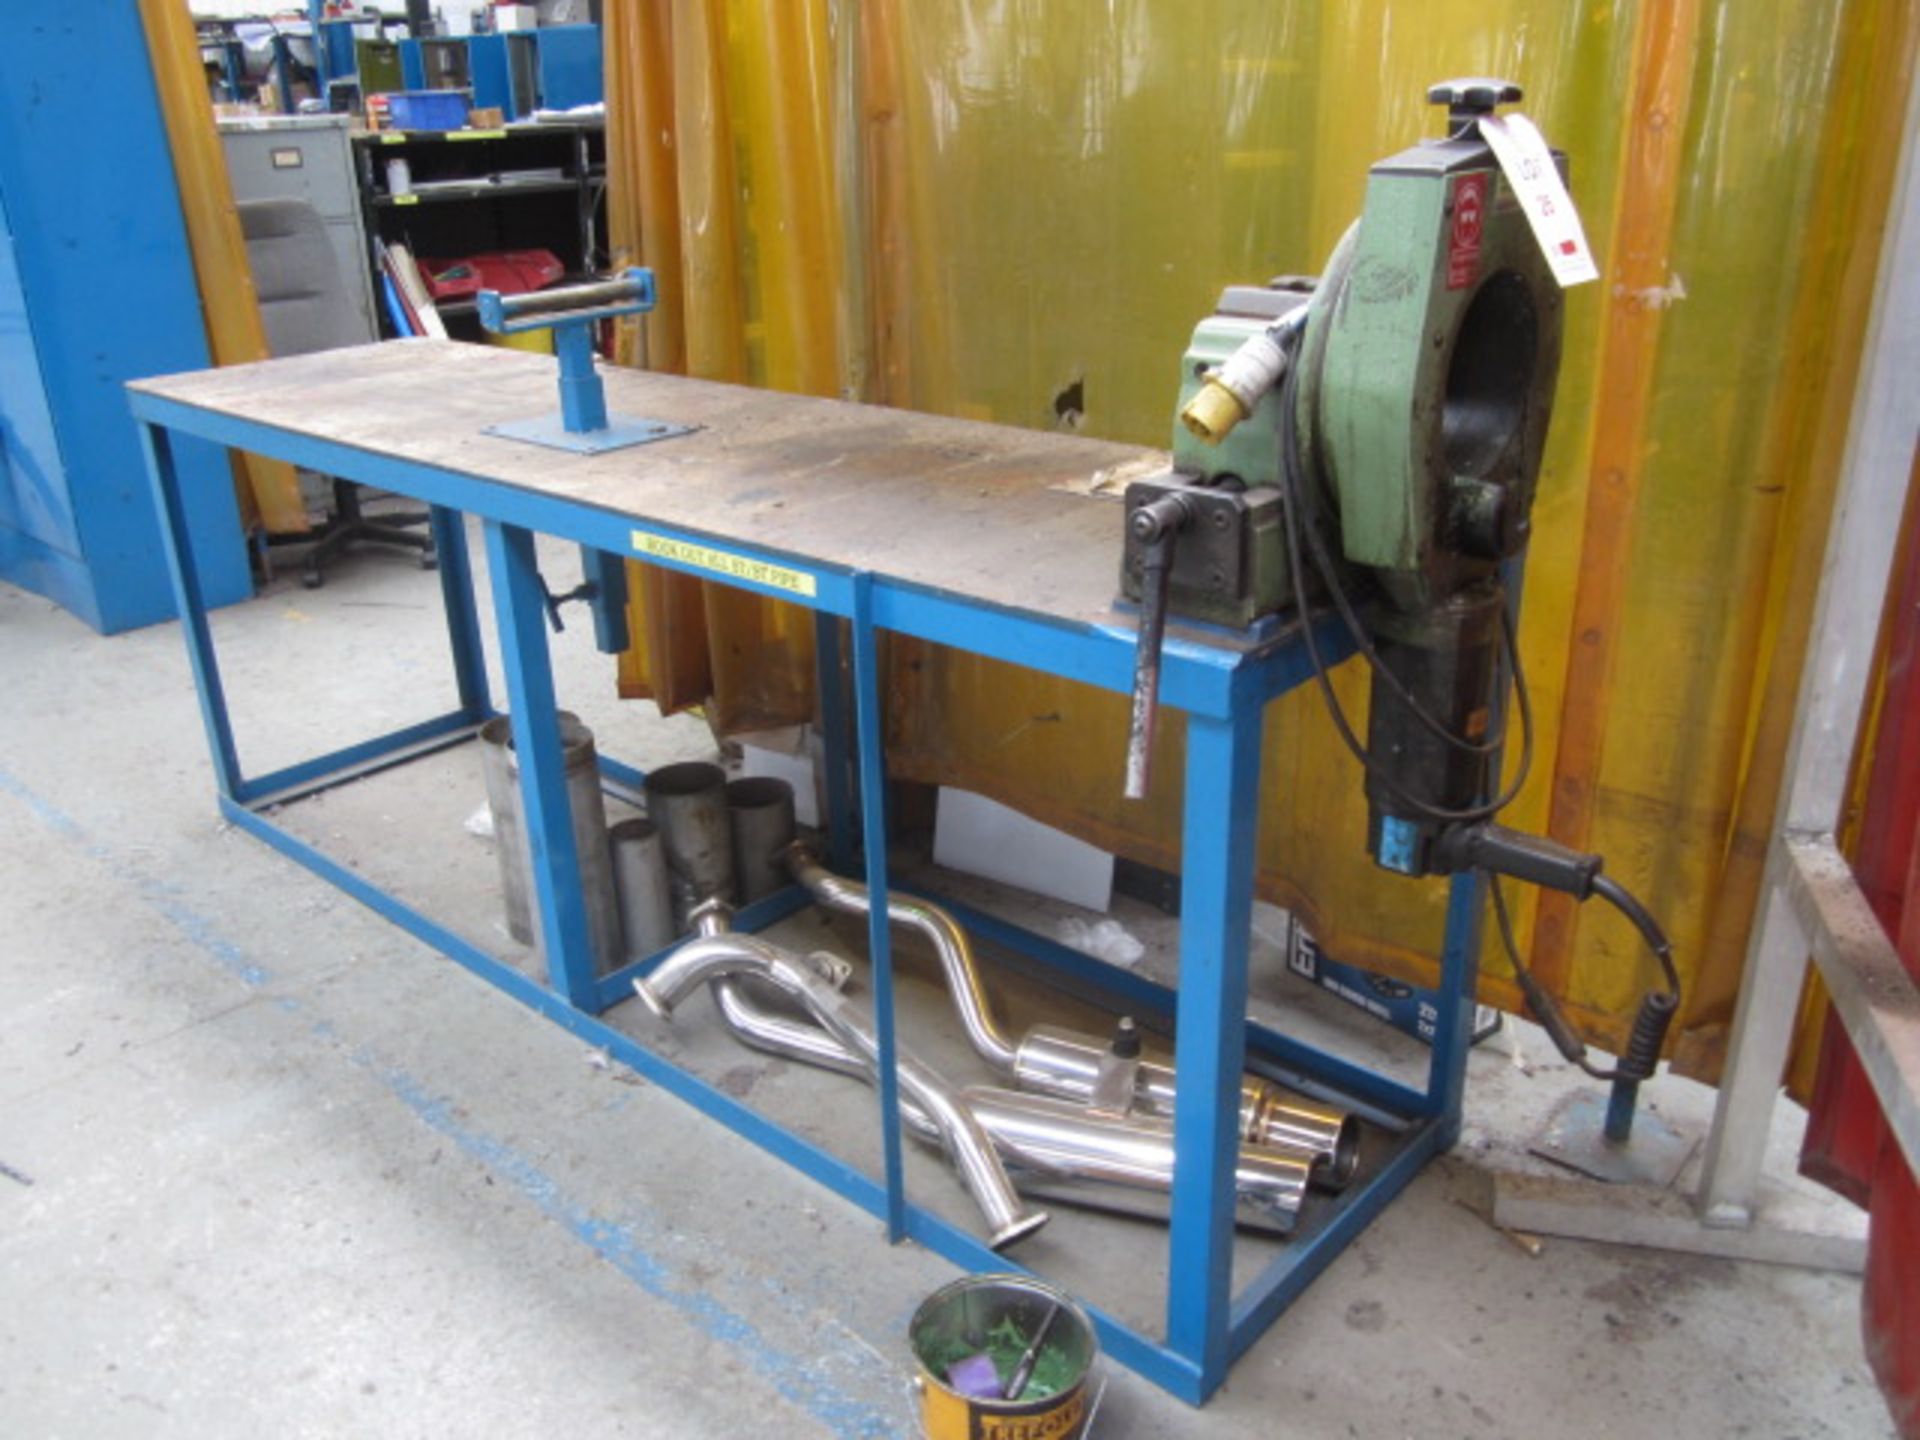 Georg Fischer type BAE6 pipe cutter, approx. cutting diameter 180mm,110v mounted on work bench.